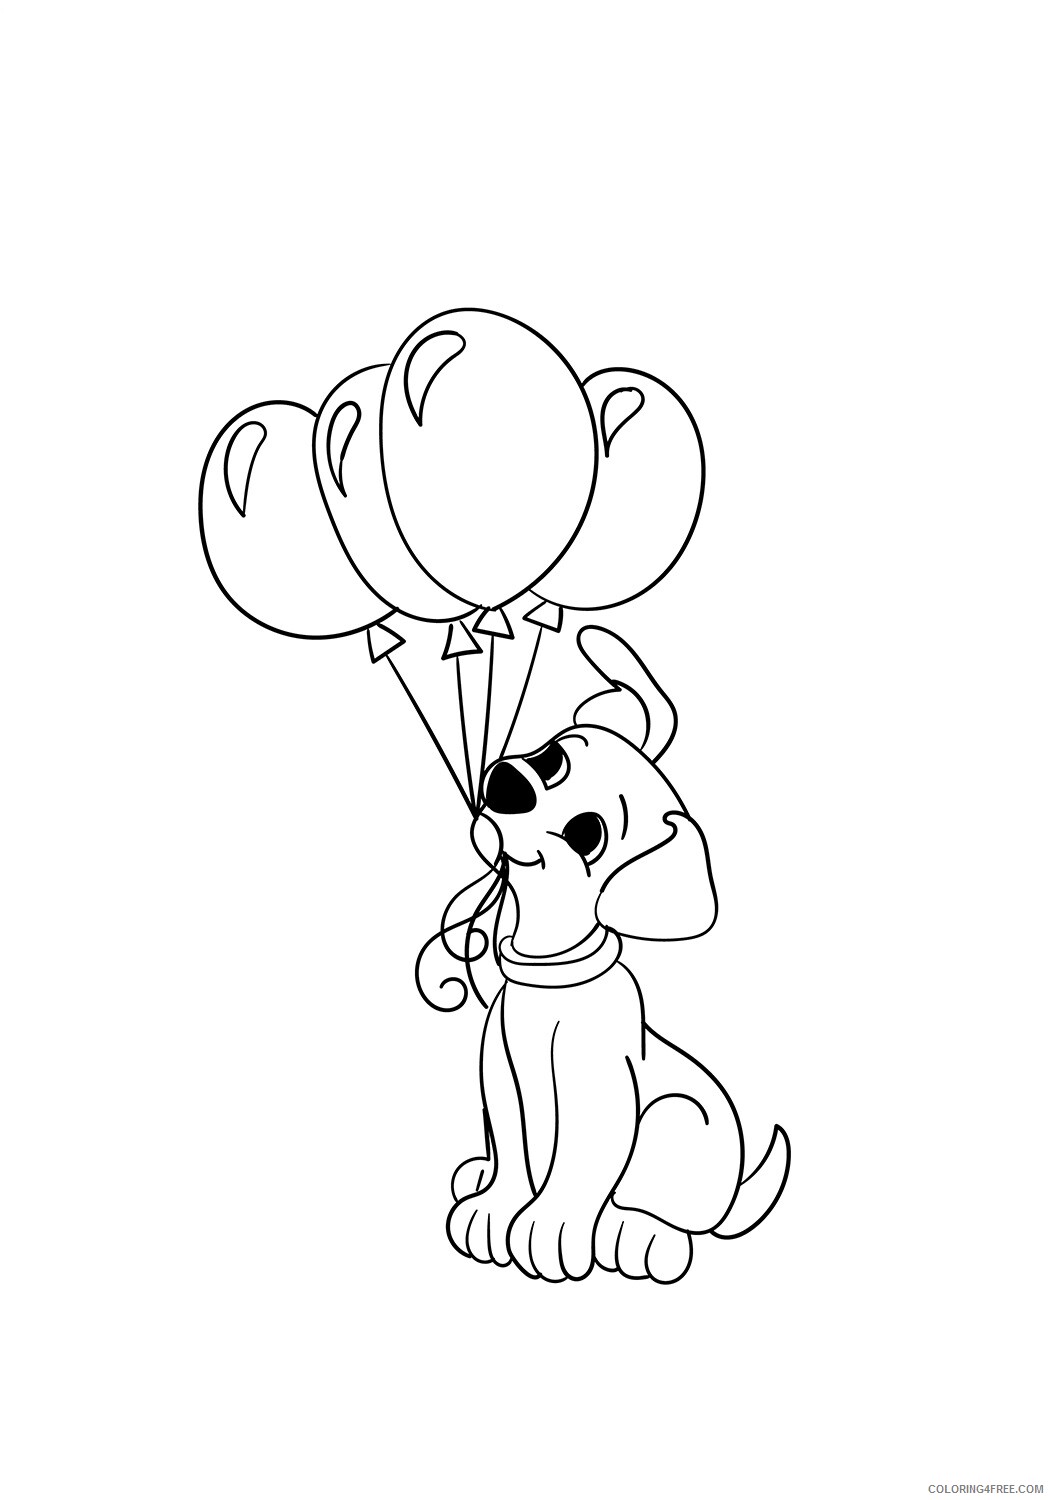 Puppy Coloring Pages Animal Printable Sheets the cute puppy with balloons 2021 Coloring4free